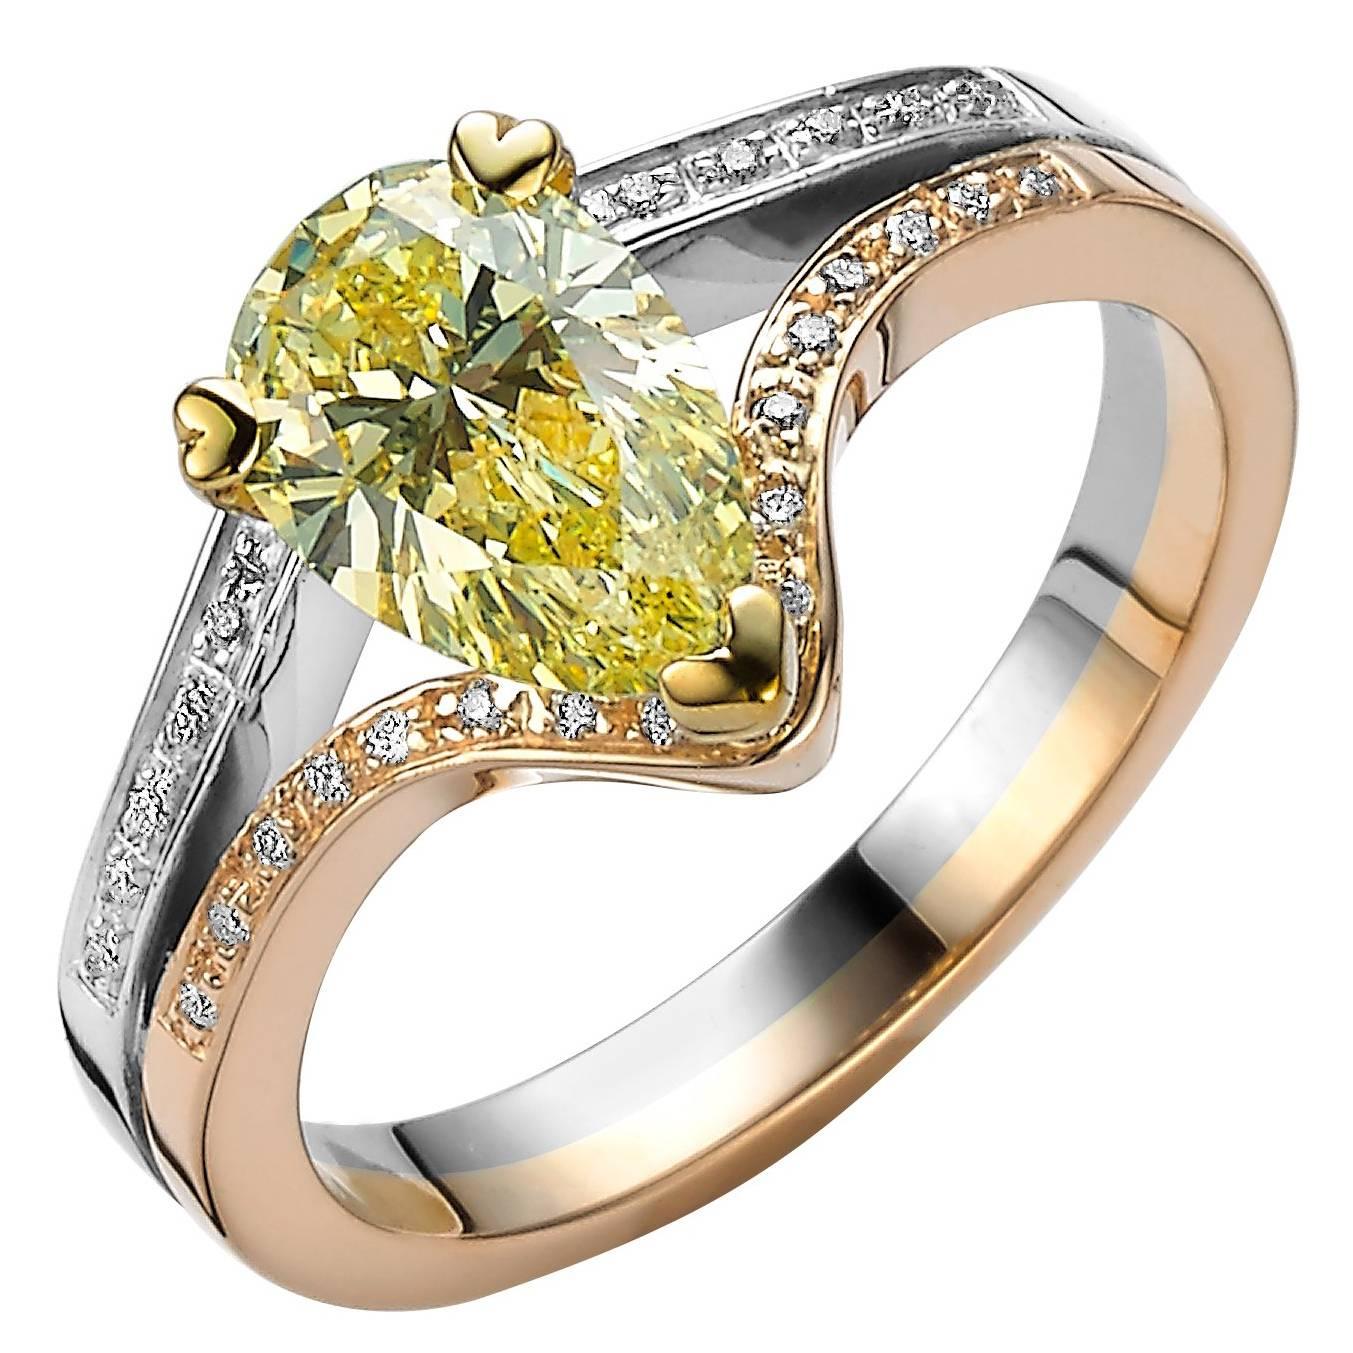 Fancy-Yellow Diamond Ring For Sale